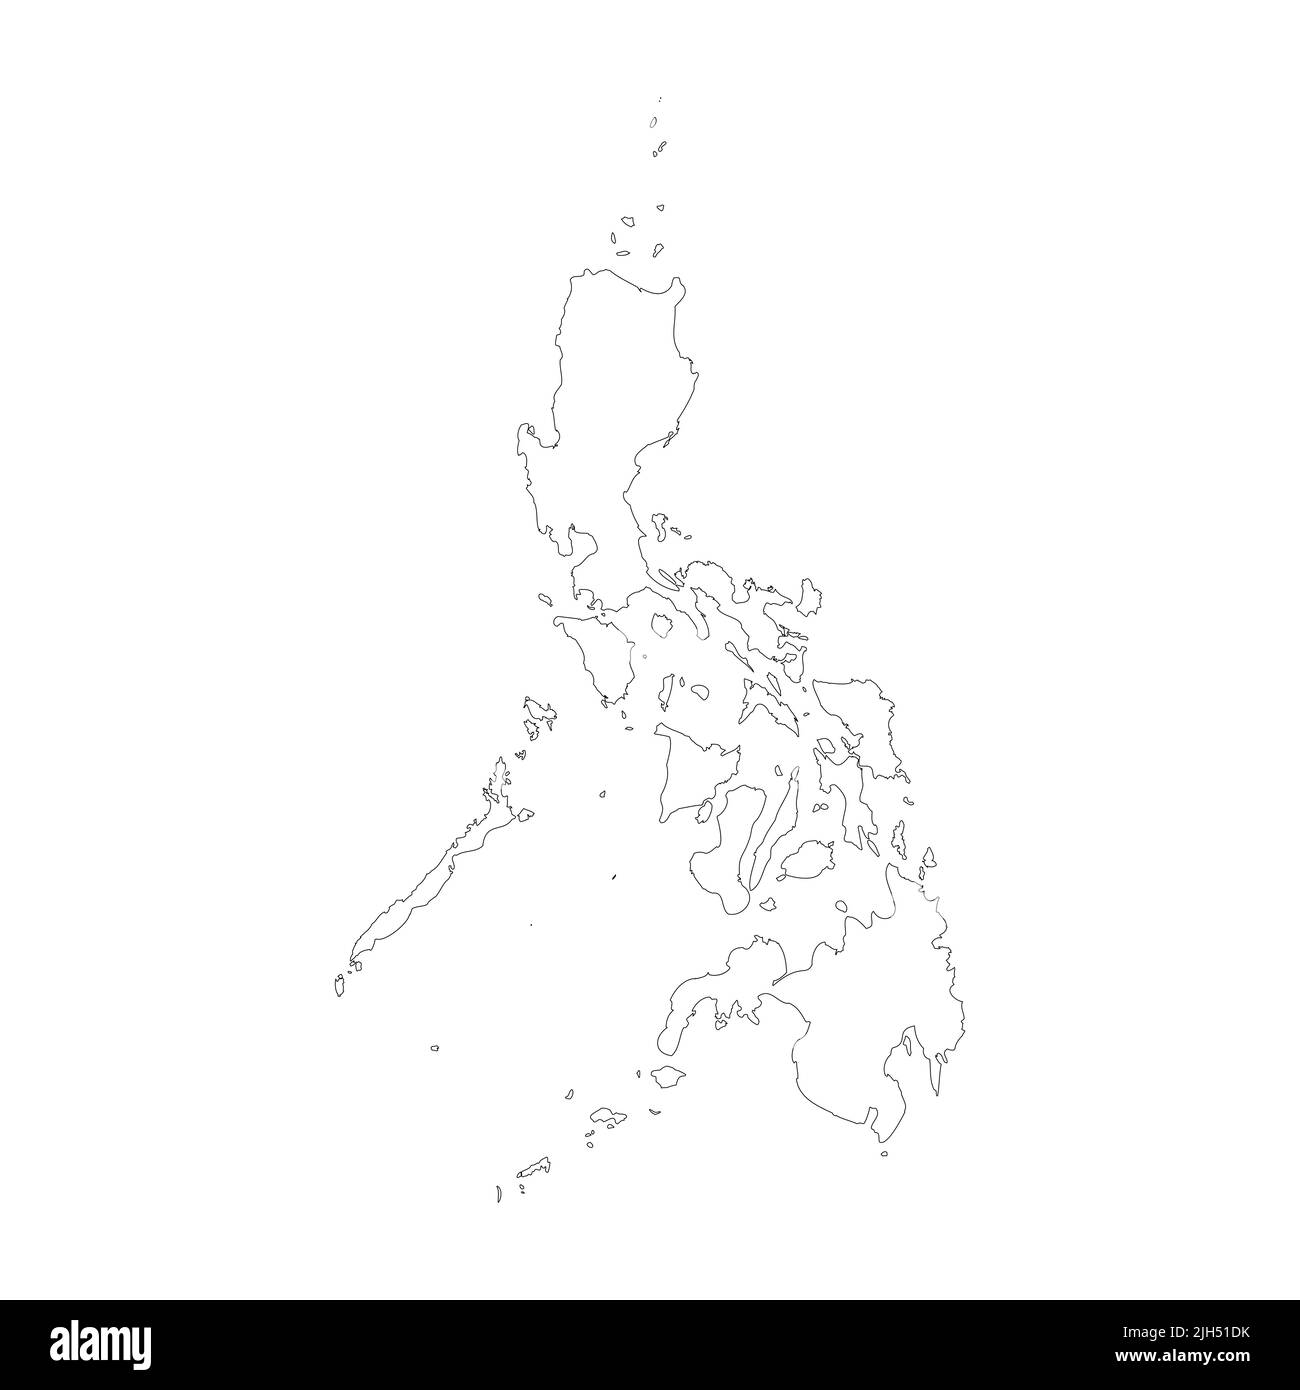 Philippines map free printing and coloring image